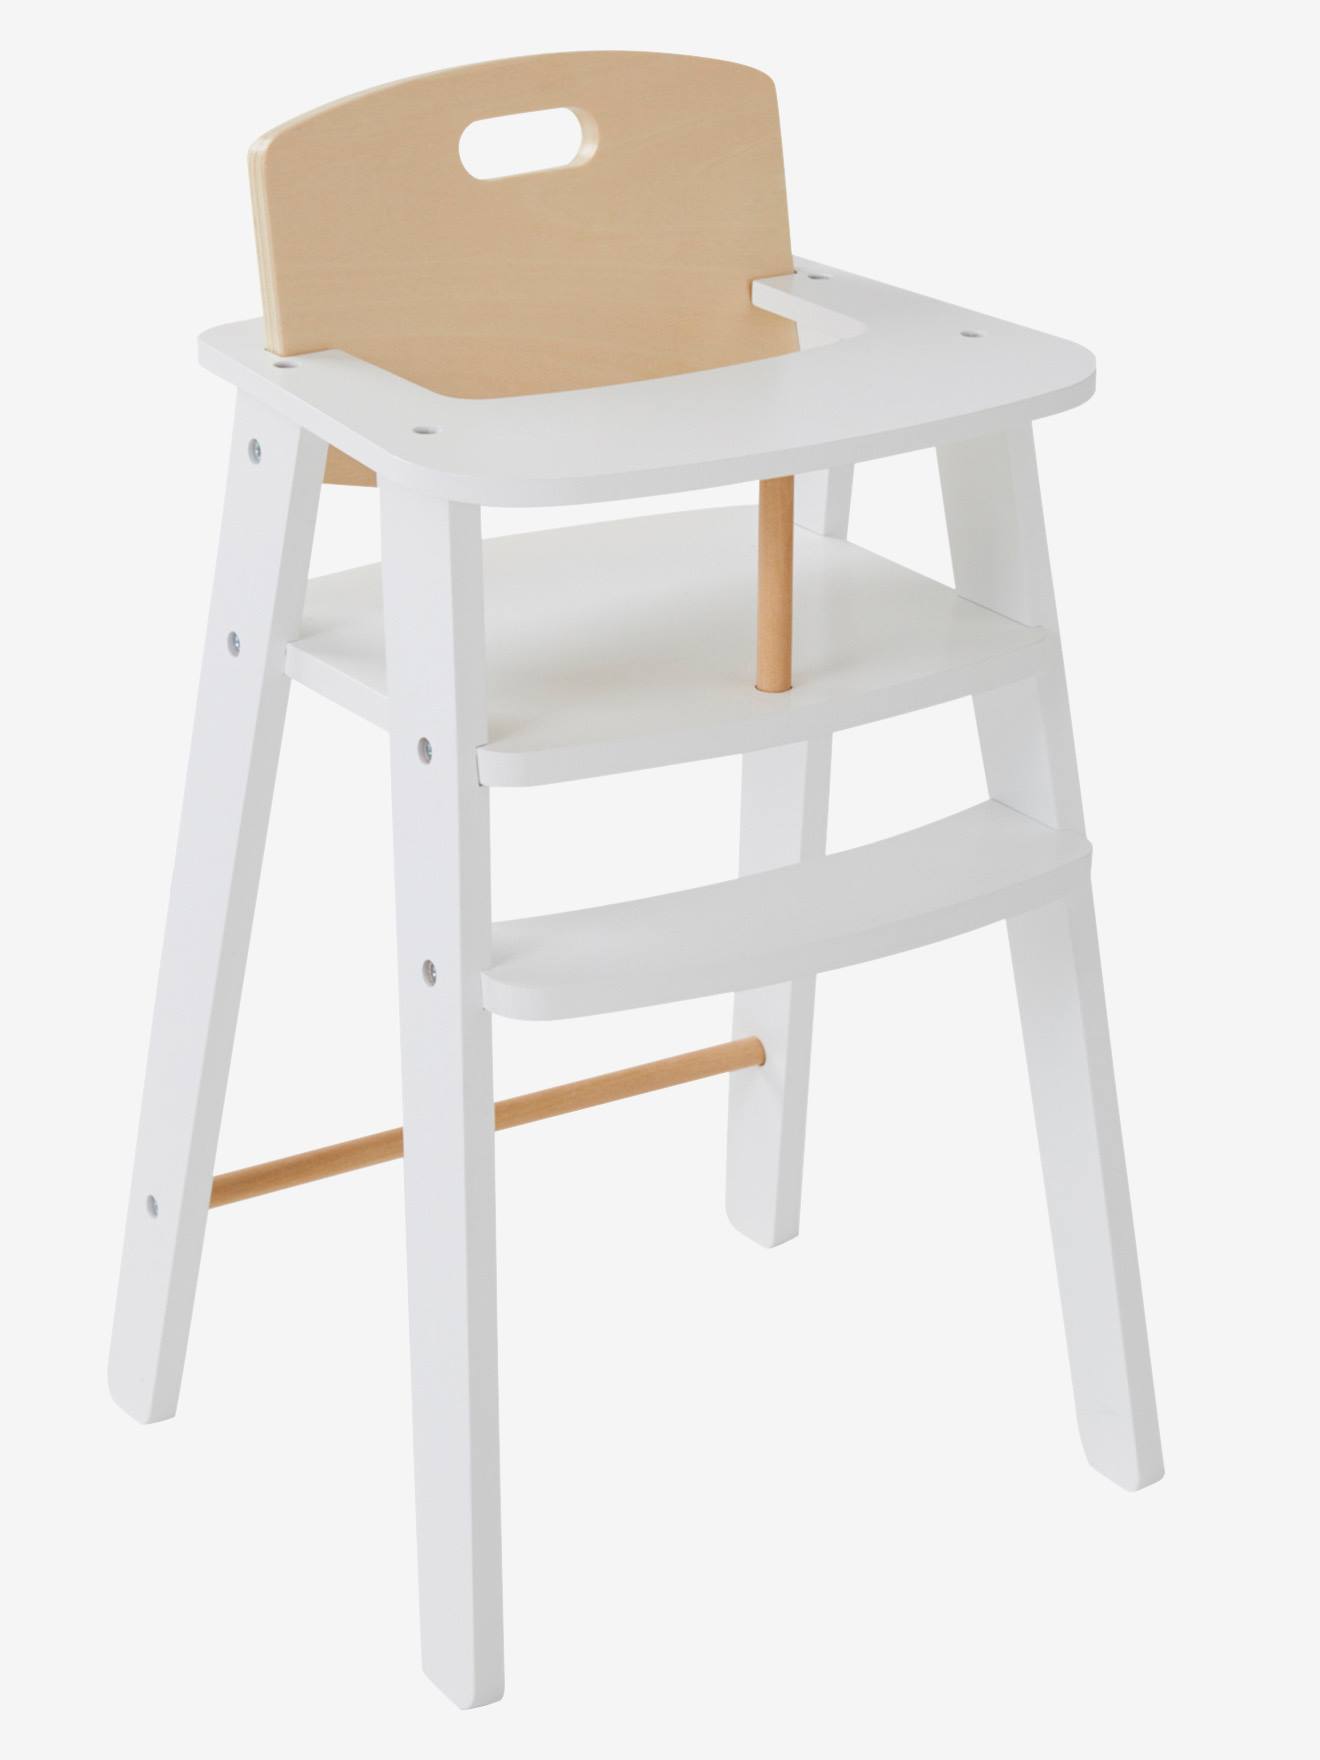 Wooden High Chair For Dolls Fsc Certified Light Pink Toys